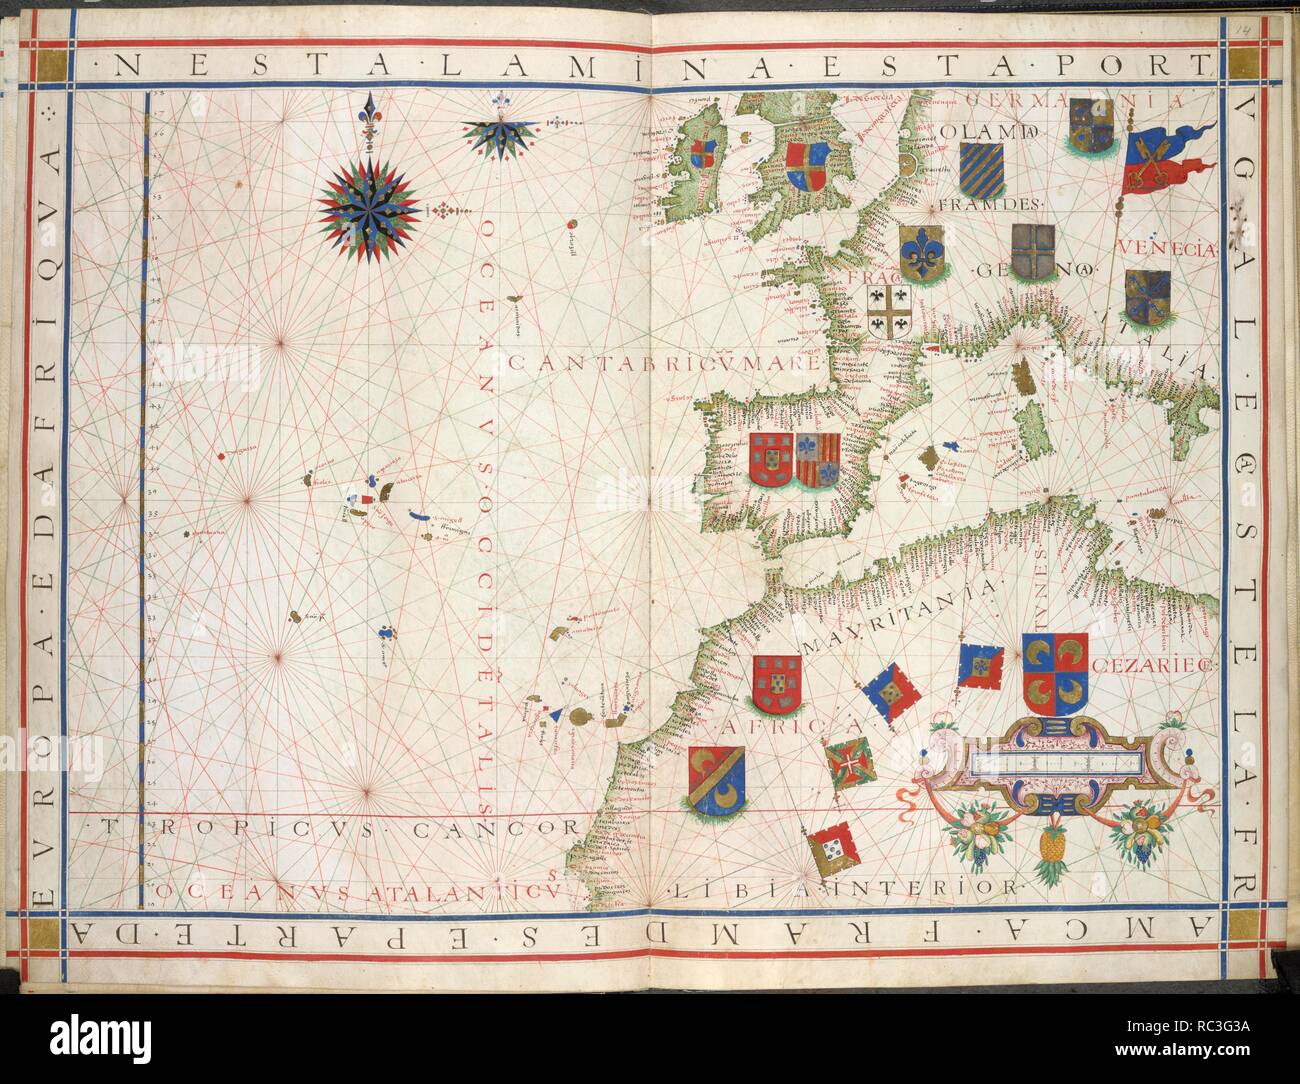 Chart of Western Europe. Universalis Orbis Hydrographia. Portugal; 1573. [Whole chart] Chart of Western Europe, from the British isles, the eastern Altlantic with the Canary islands and Azores; the Iberian peninsula and the western Mediterranean Sea to Italy, and the north west coast of Africa. Decoraed with heraldic coats of arms  Image taken from Universalis Orbis Hydrographia.  Originally published/produced in Portugal; 1573. . Source: Add. 31317, ff.13v-14. Language: Portuguese. Stock Photo